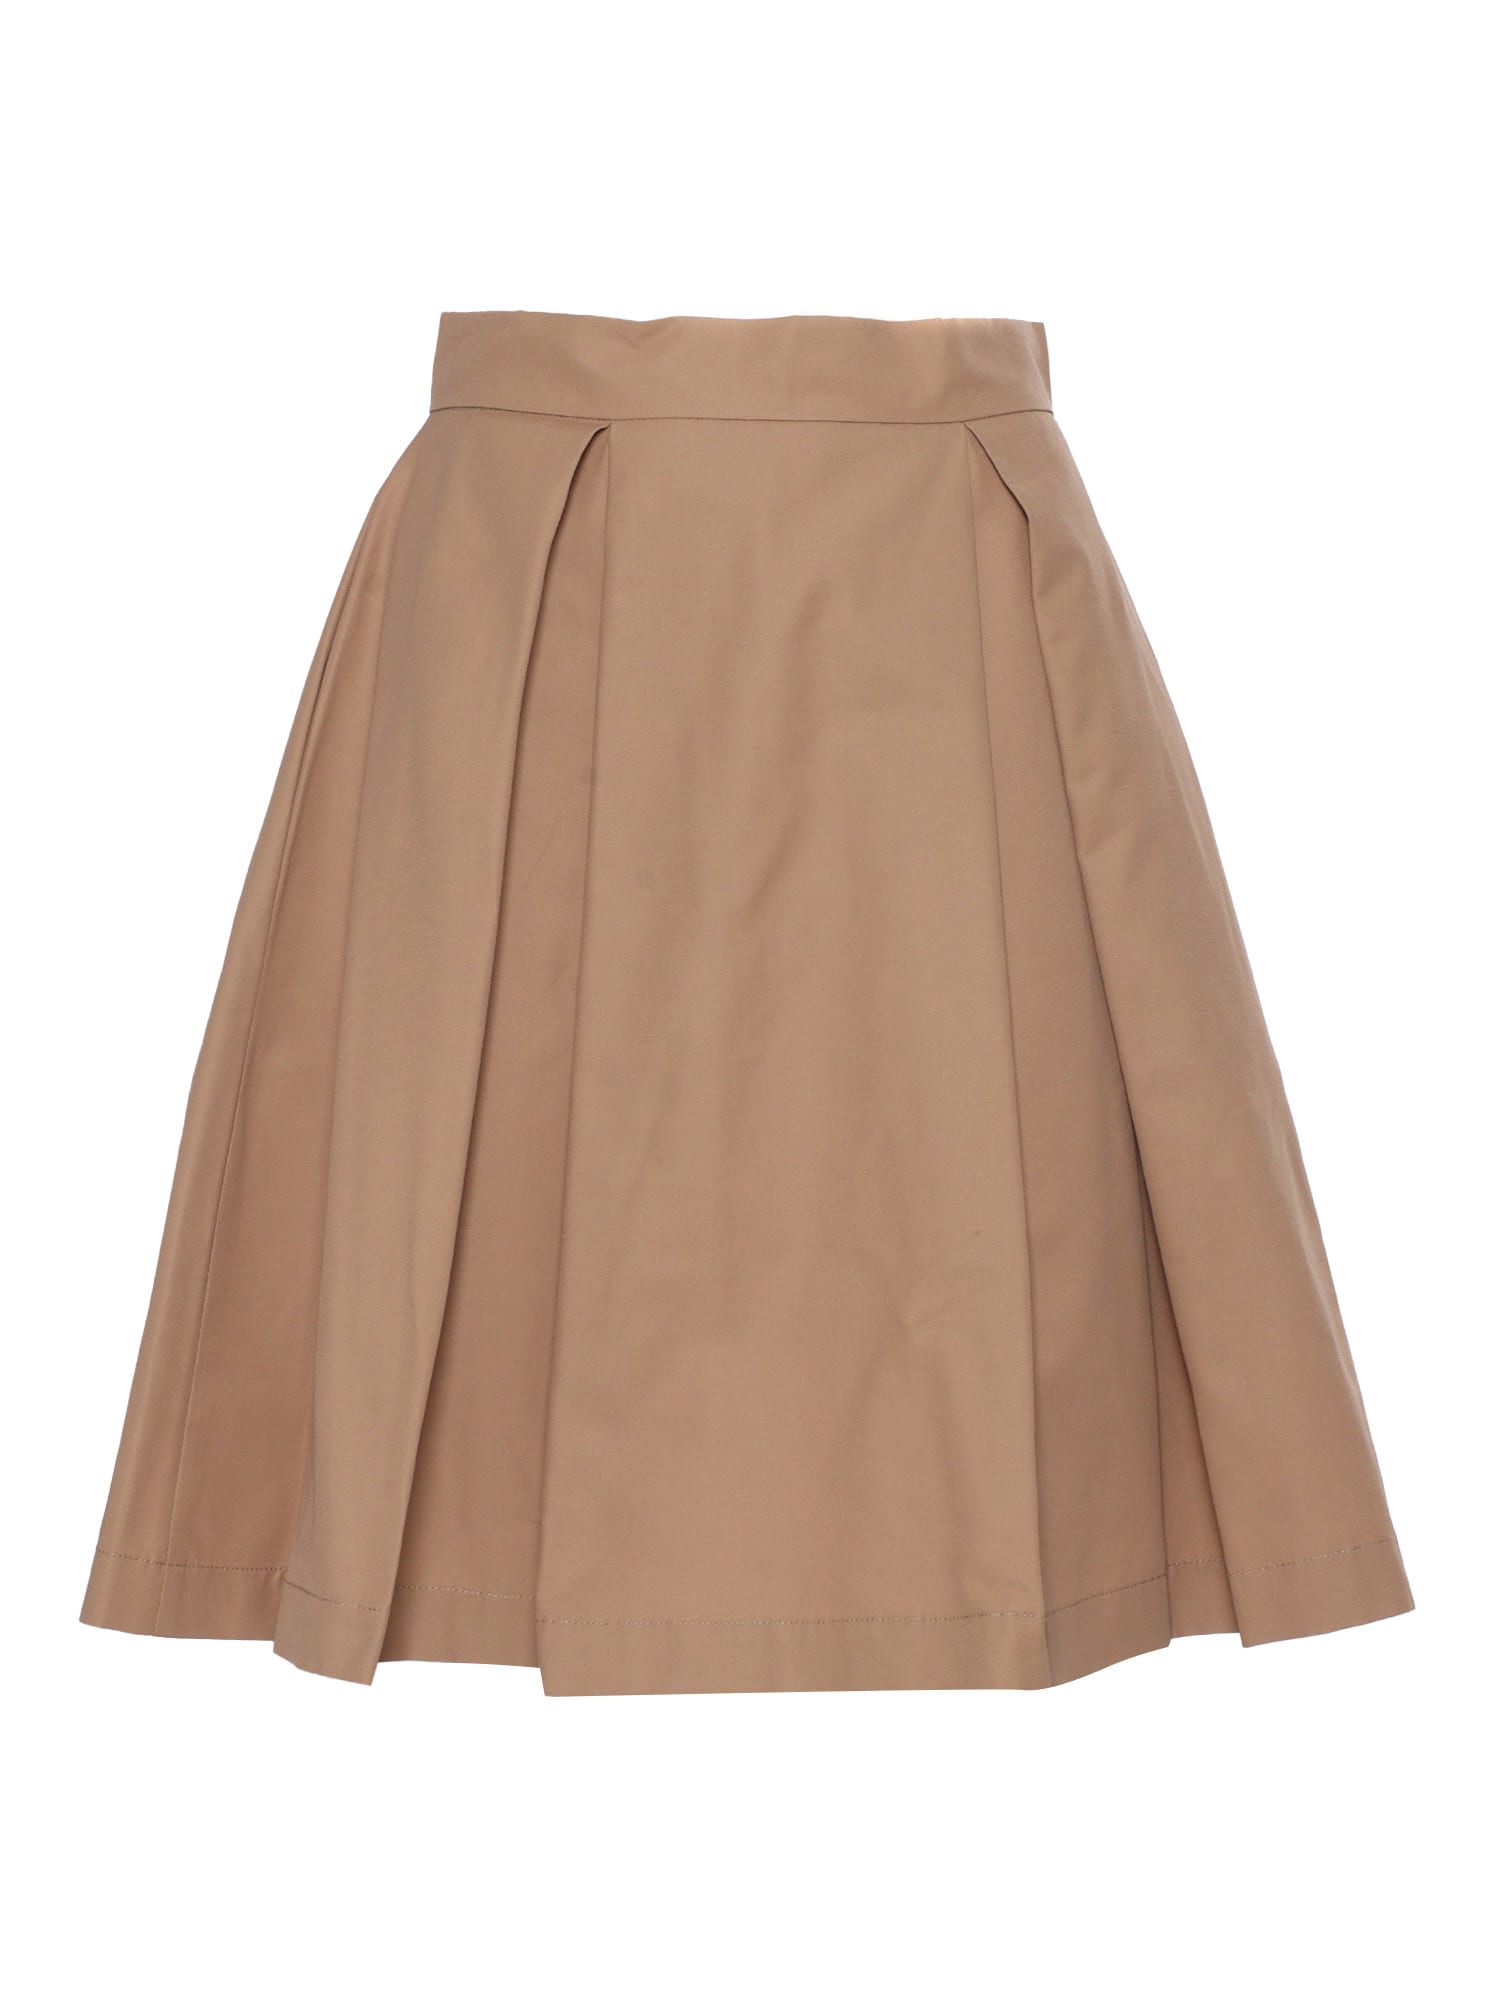 Max&amp;co. Kids' Brown Flared Skirt